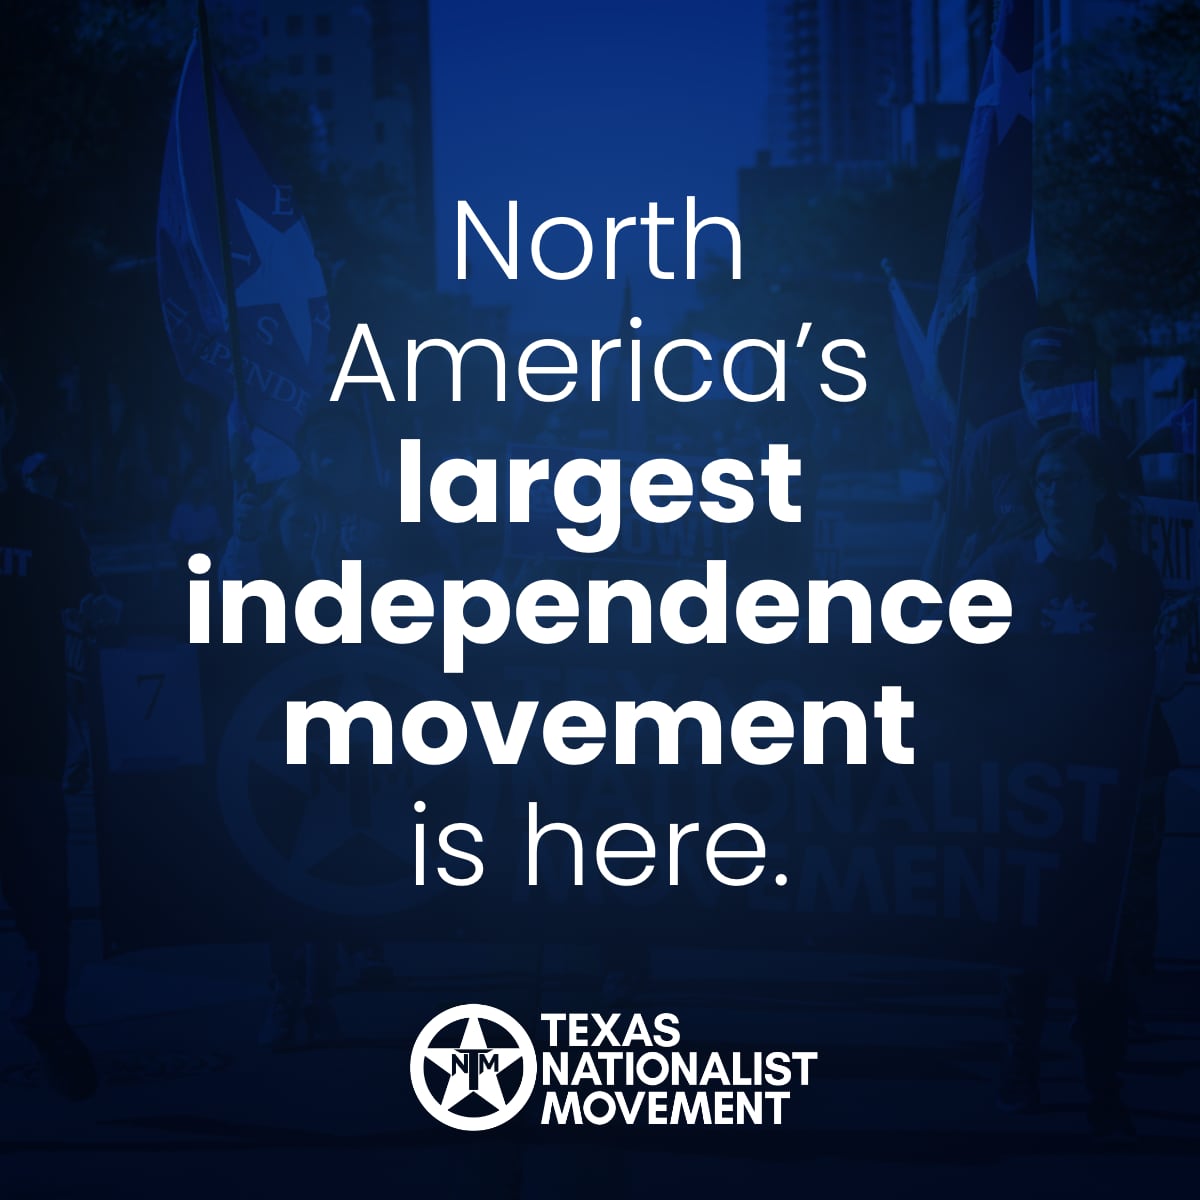 The largest independence movement in North American history is right at your doorstep. Register your support at tnm.me.